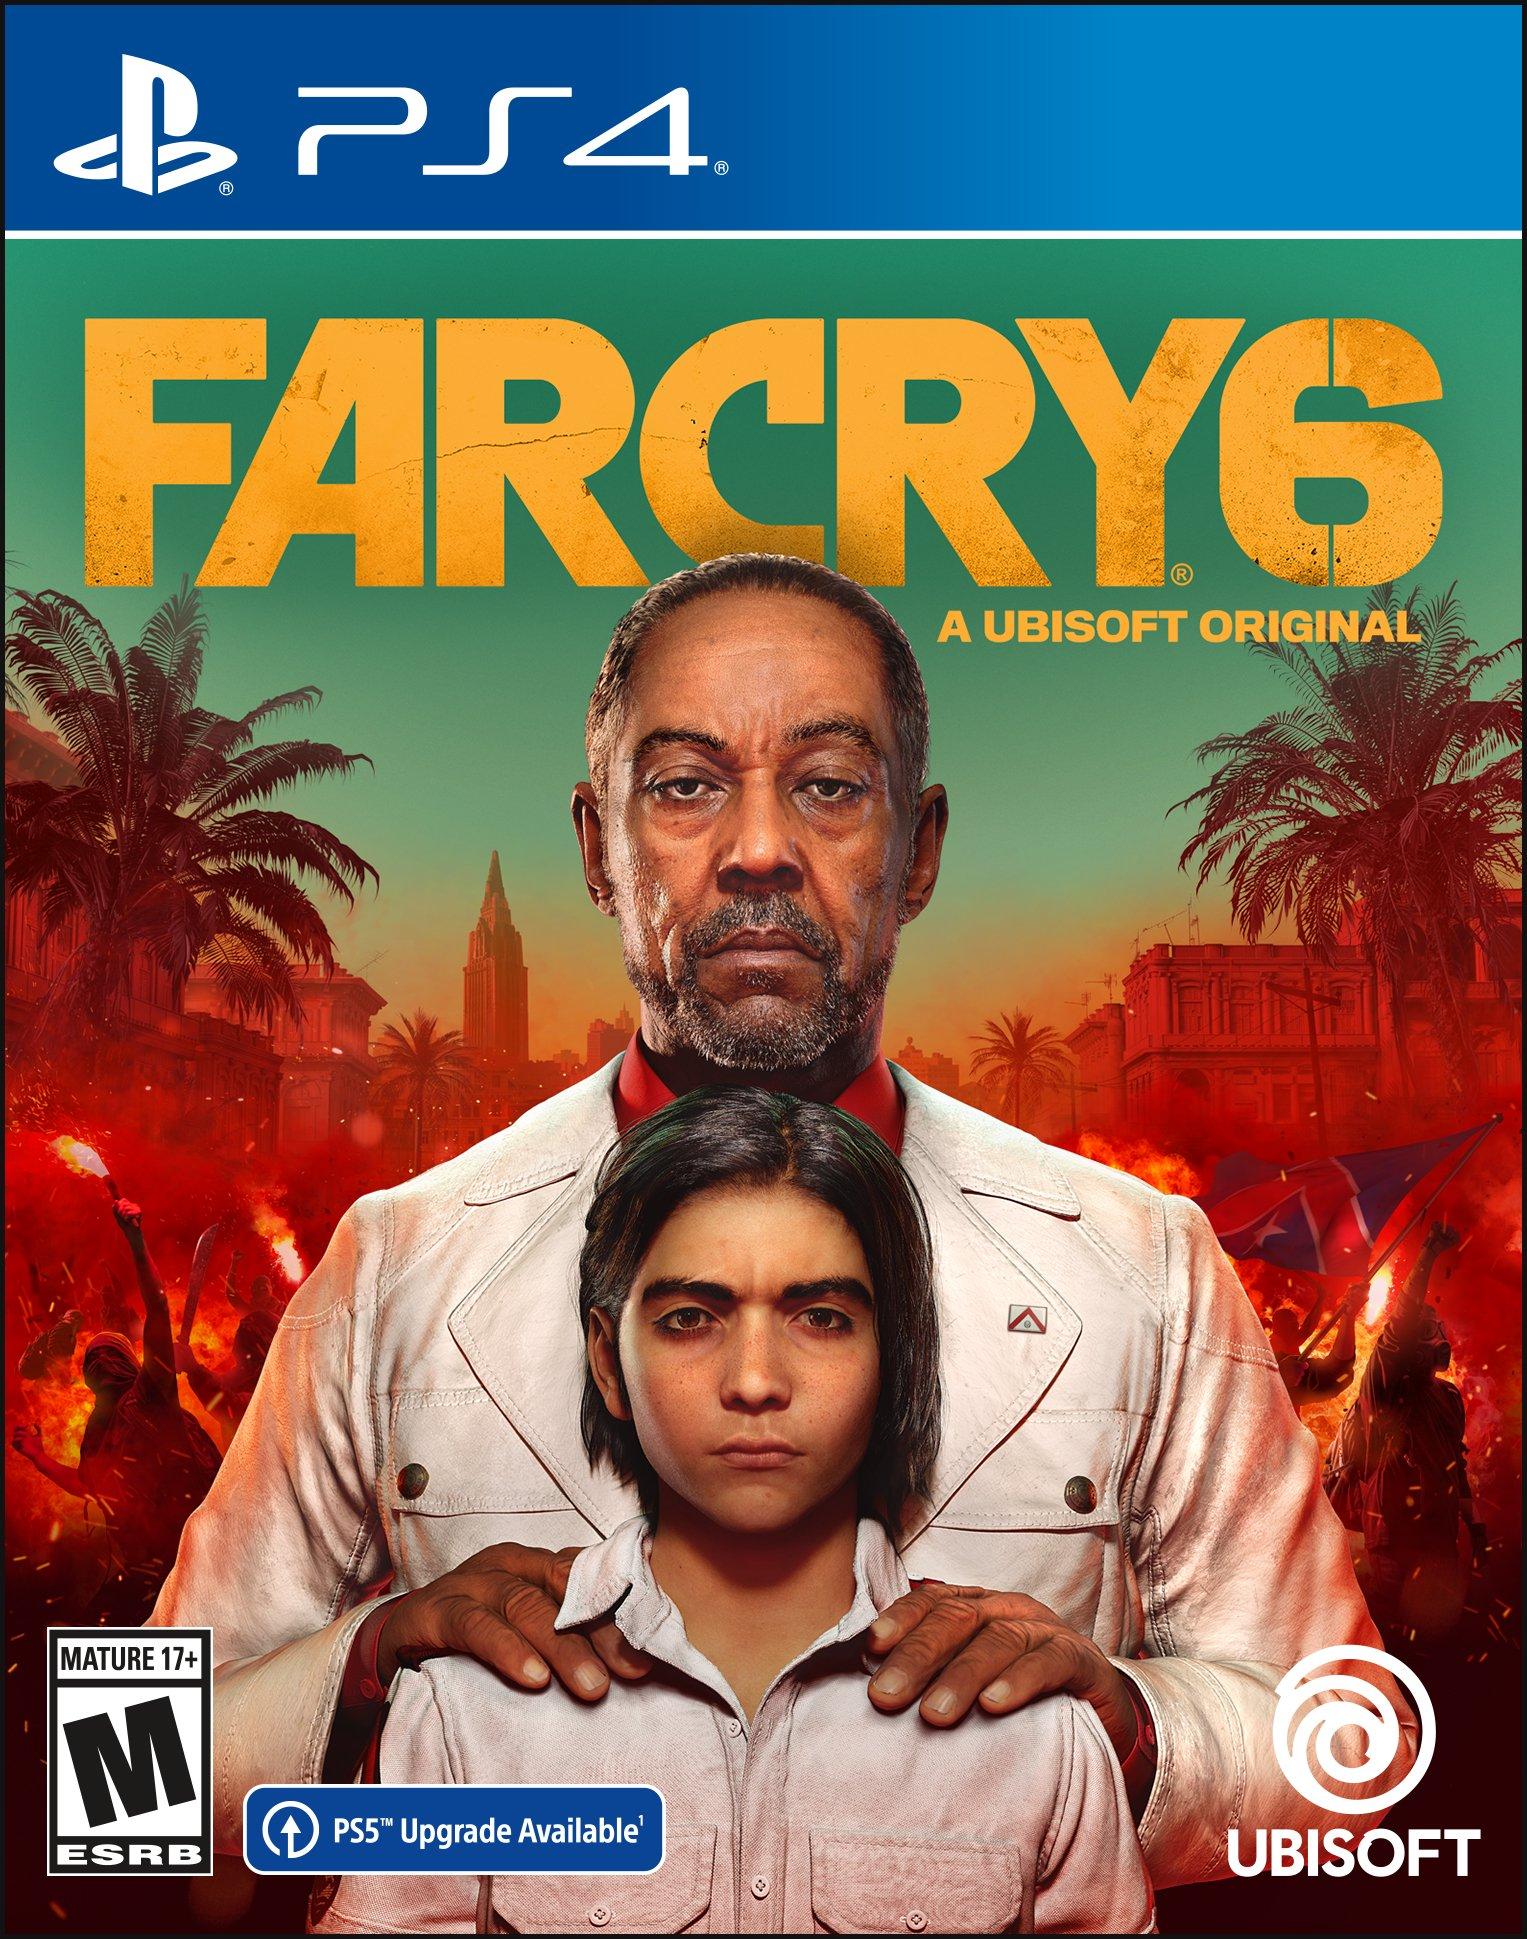 Two Copies Of Far Cry 6(PS4/PS5/XB1/S/X) - $24.99 @ Best Buy with BOGO promotion and price match to Gamestop sale price - YMMV